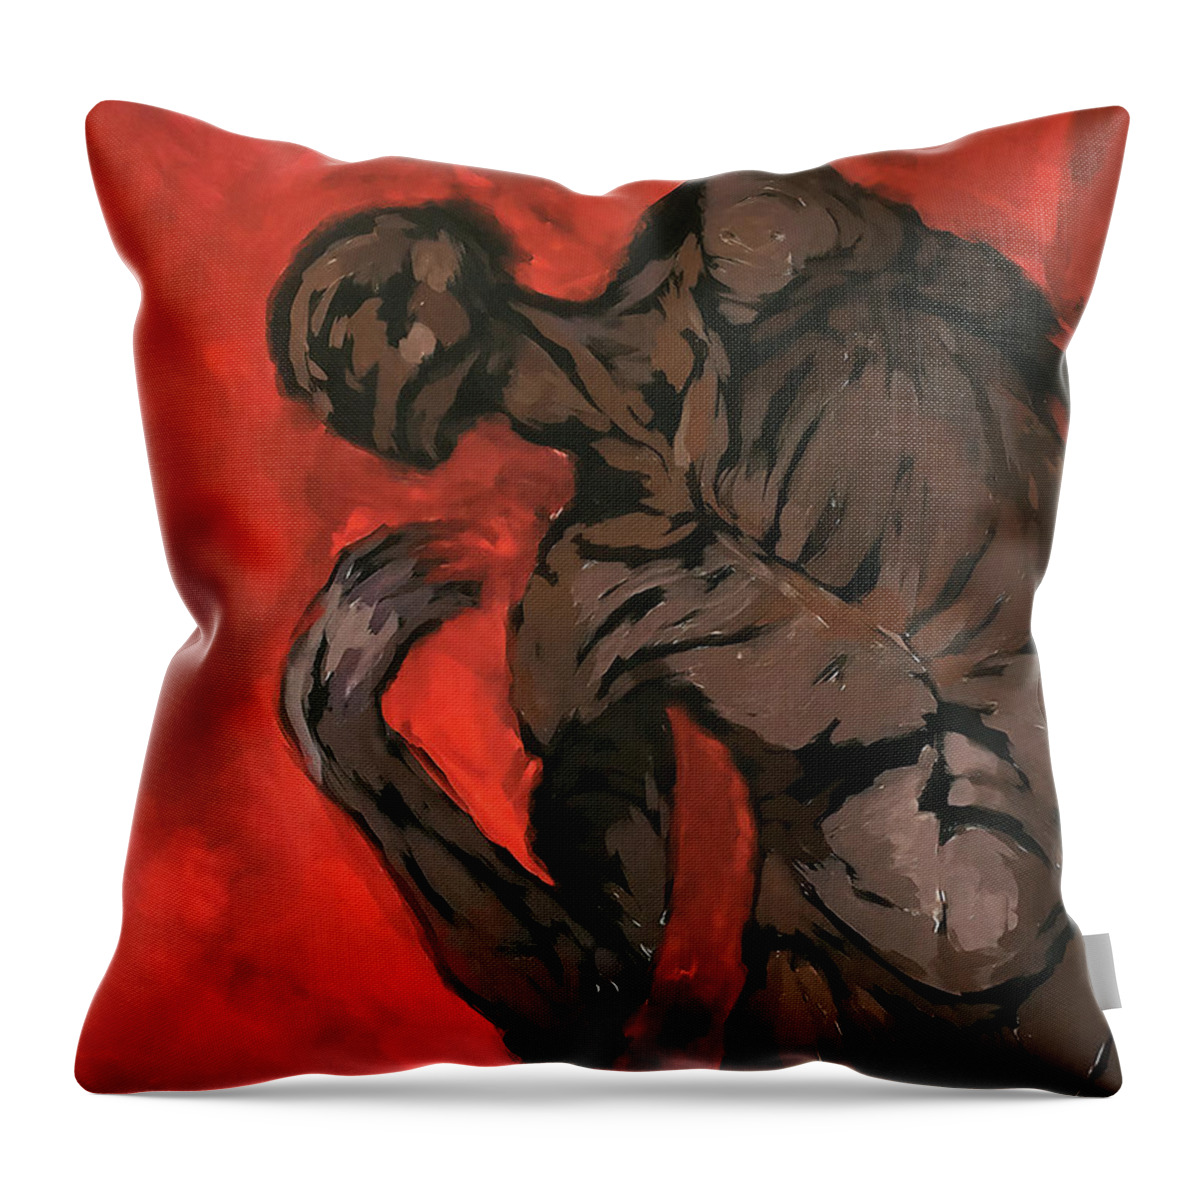 #specola Throw Pillow featuring the painting Body Study 8 by Veronica Huacuja